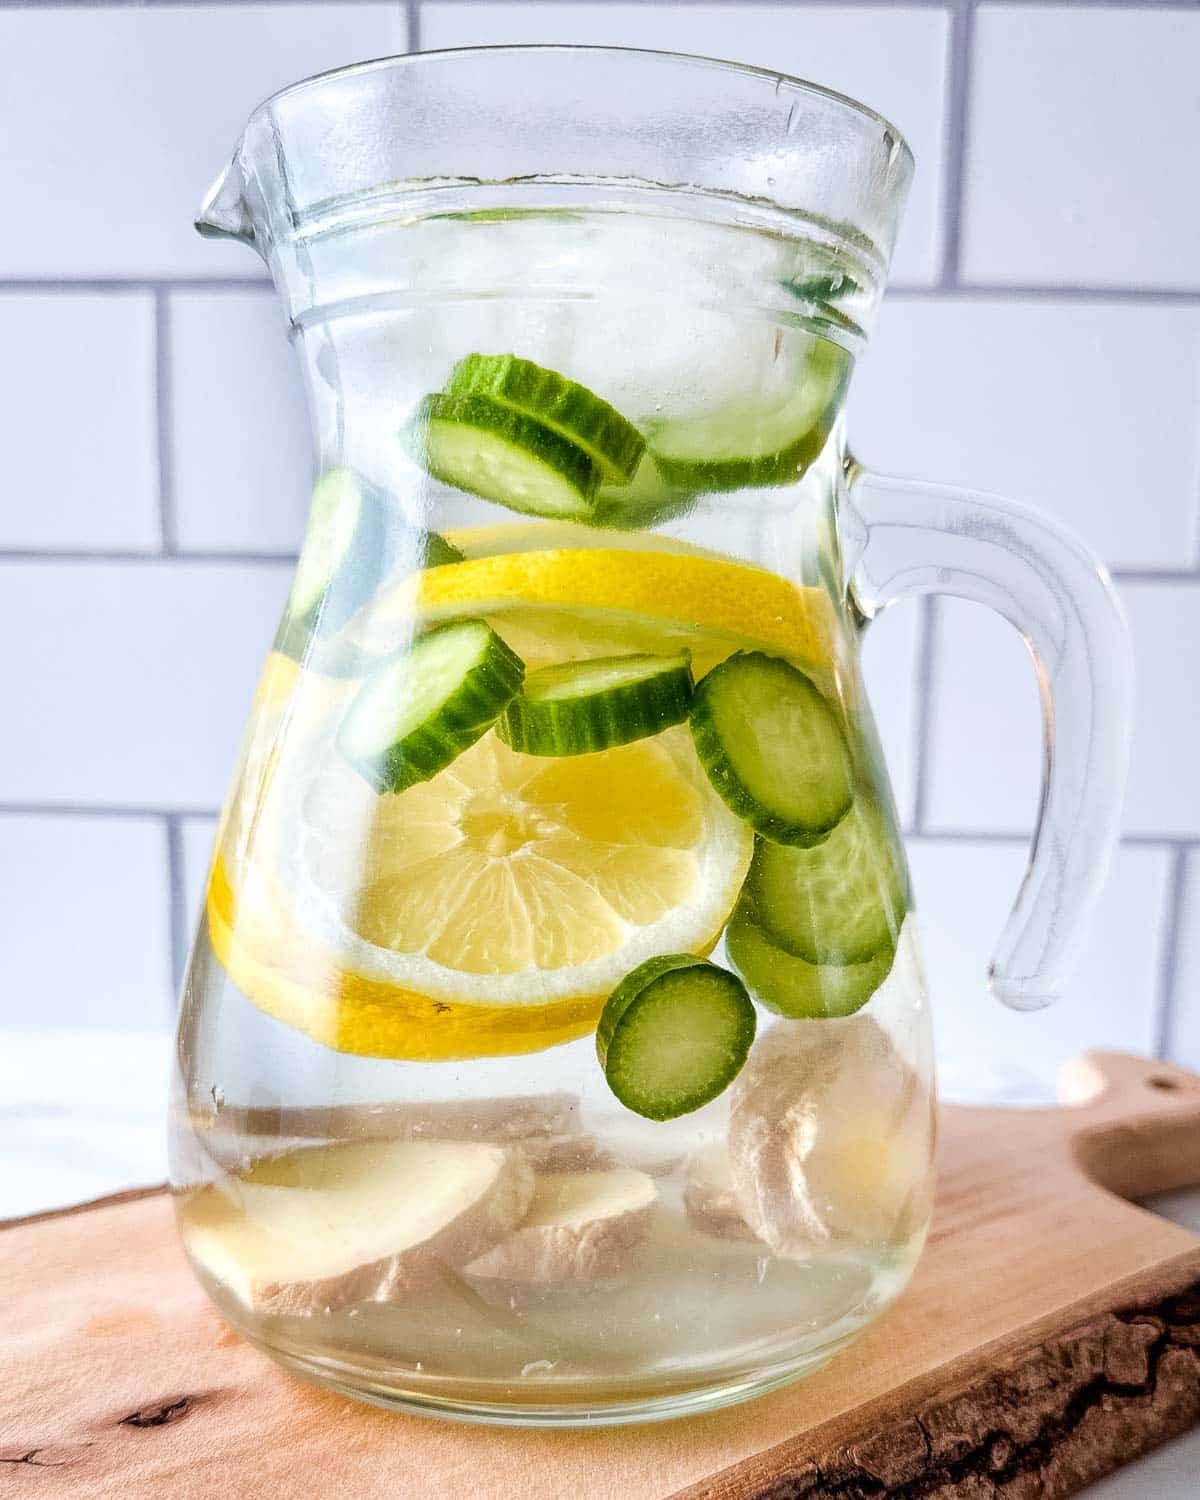 A glass pitcher filled with cucumber lemon ginger water sits on a wooden cutting board.